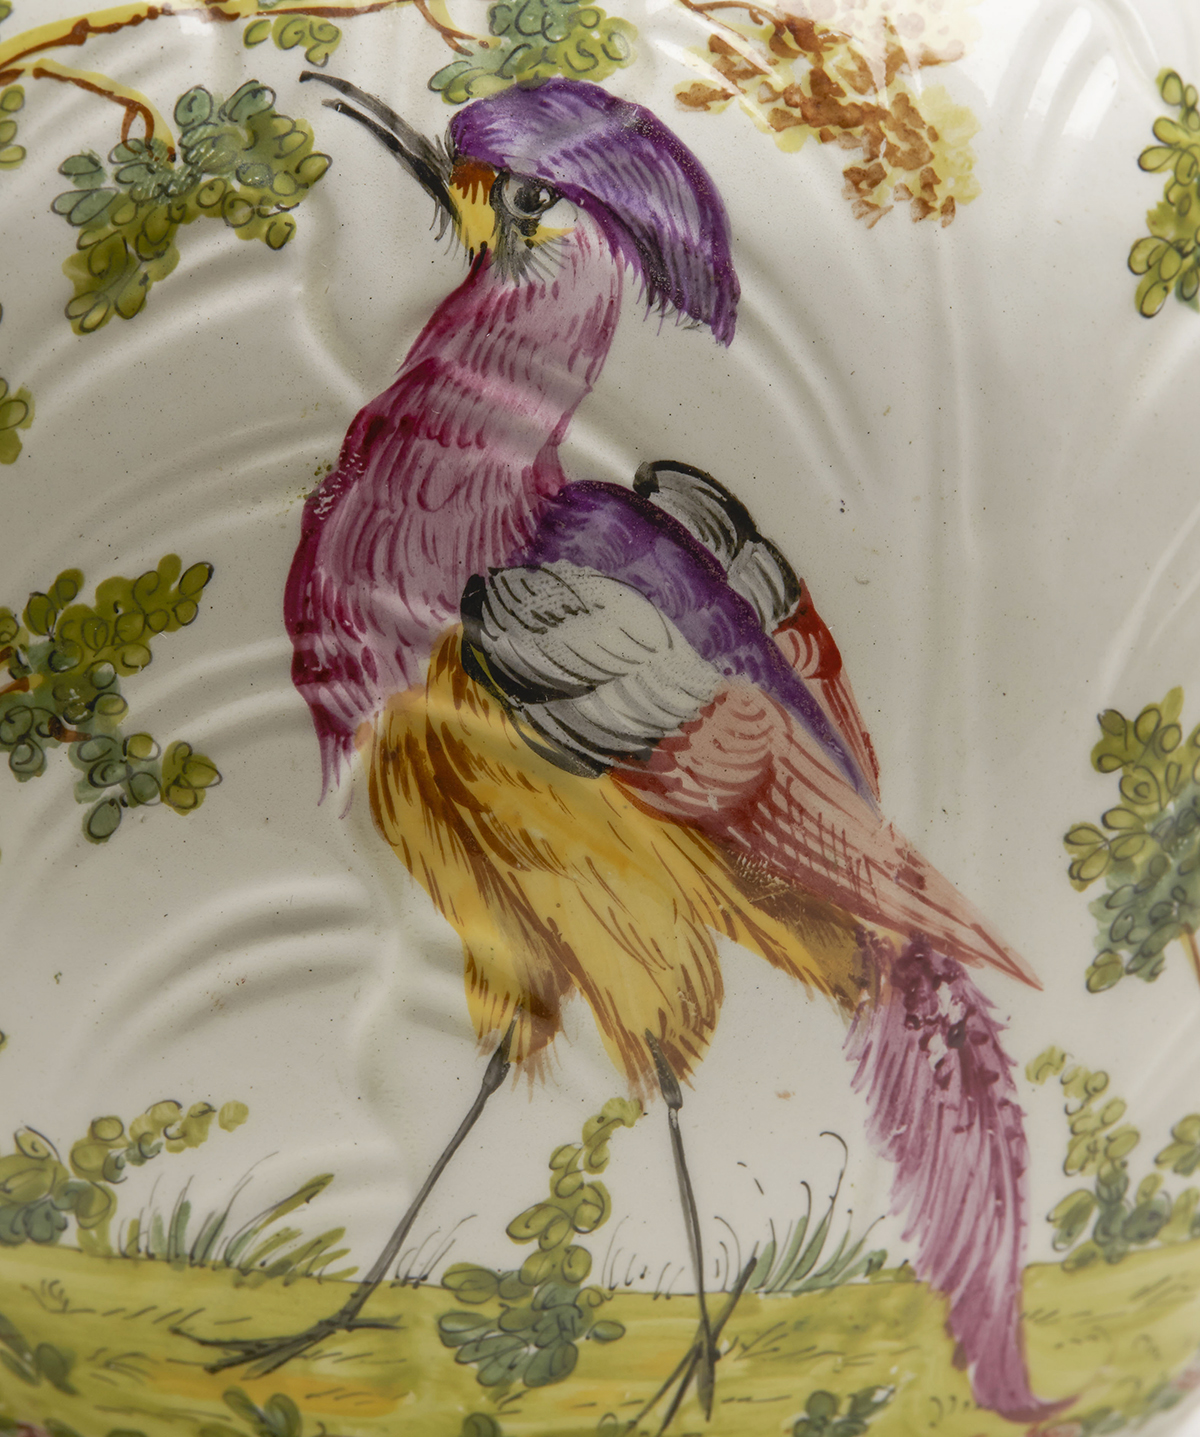 ANTIQUE CABBAGE LEAF MASK JUG WITH EXOTIC BIRDS 18/19TH C. - Image 3 of 9